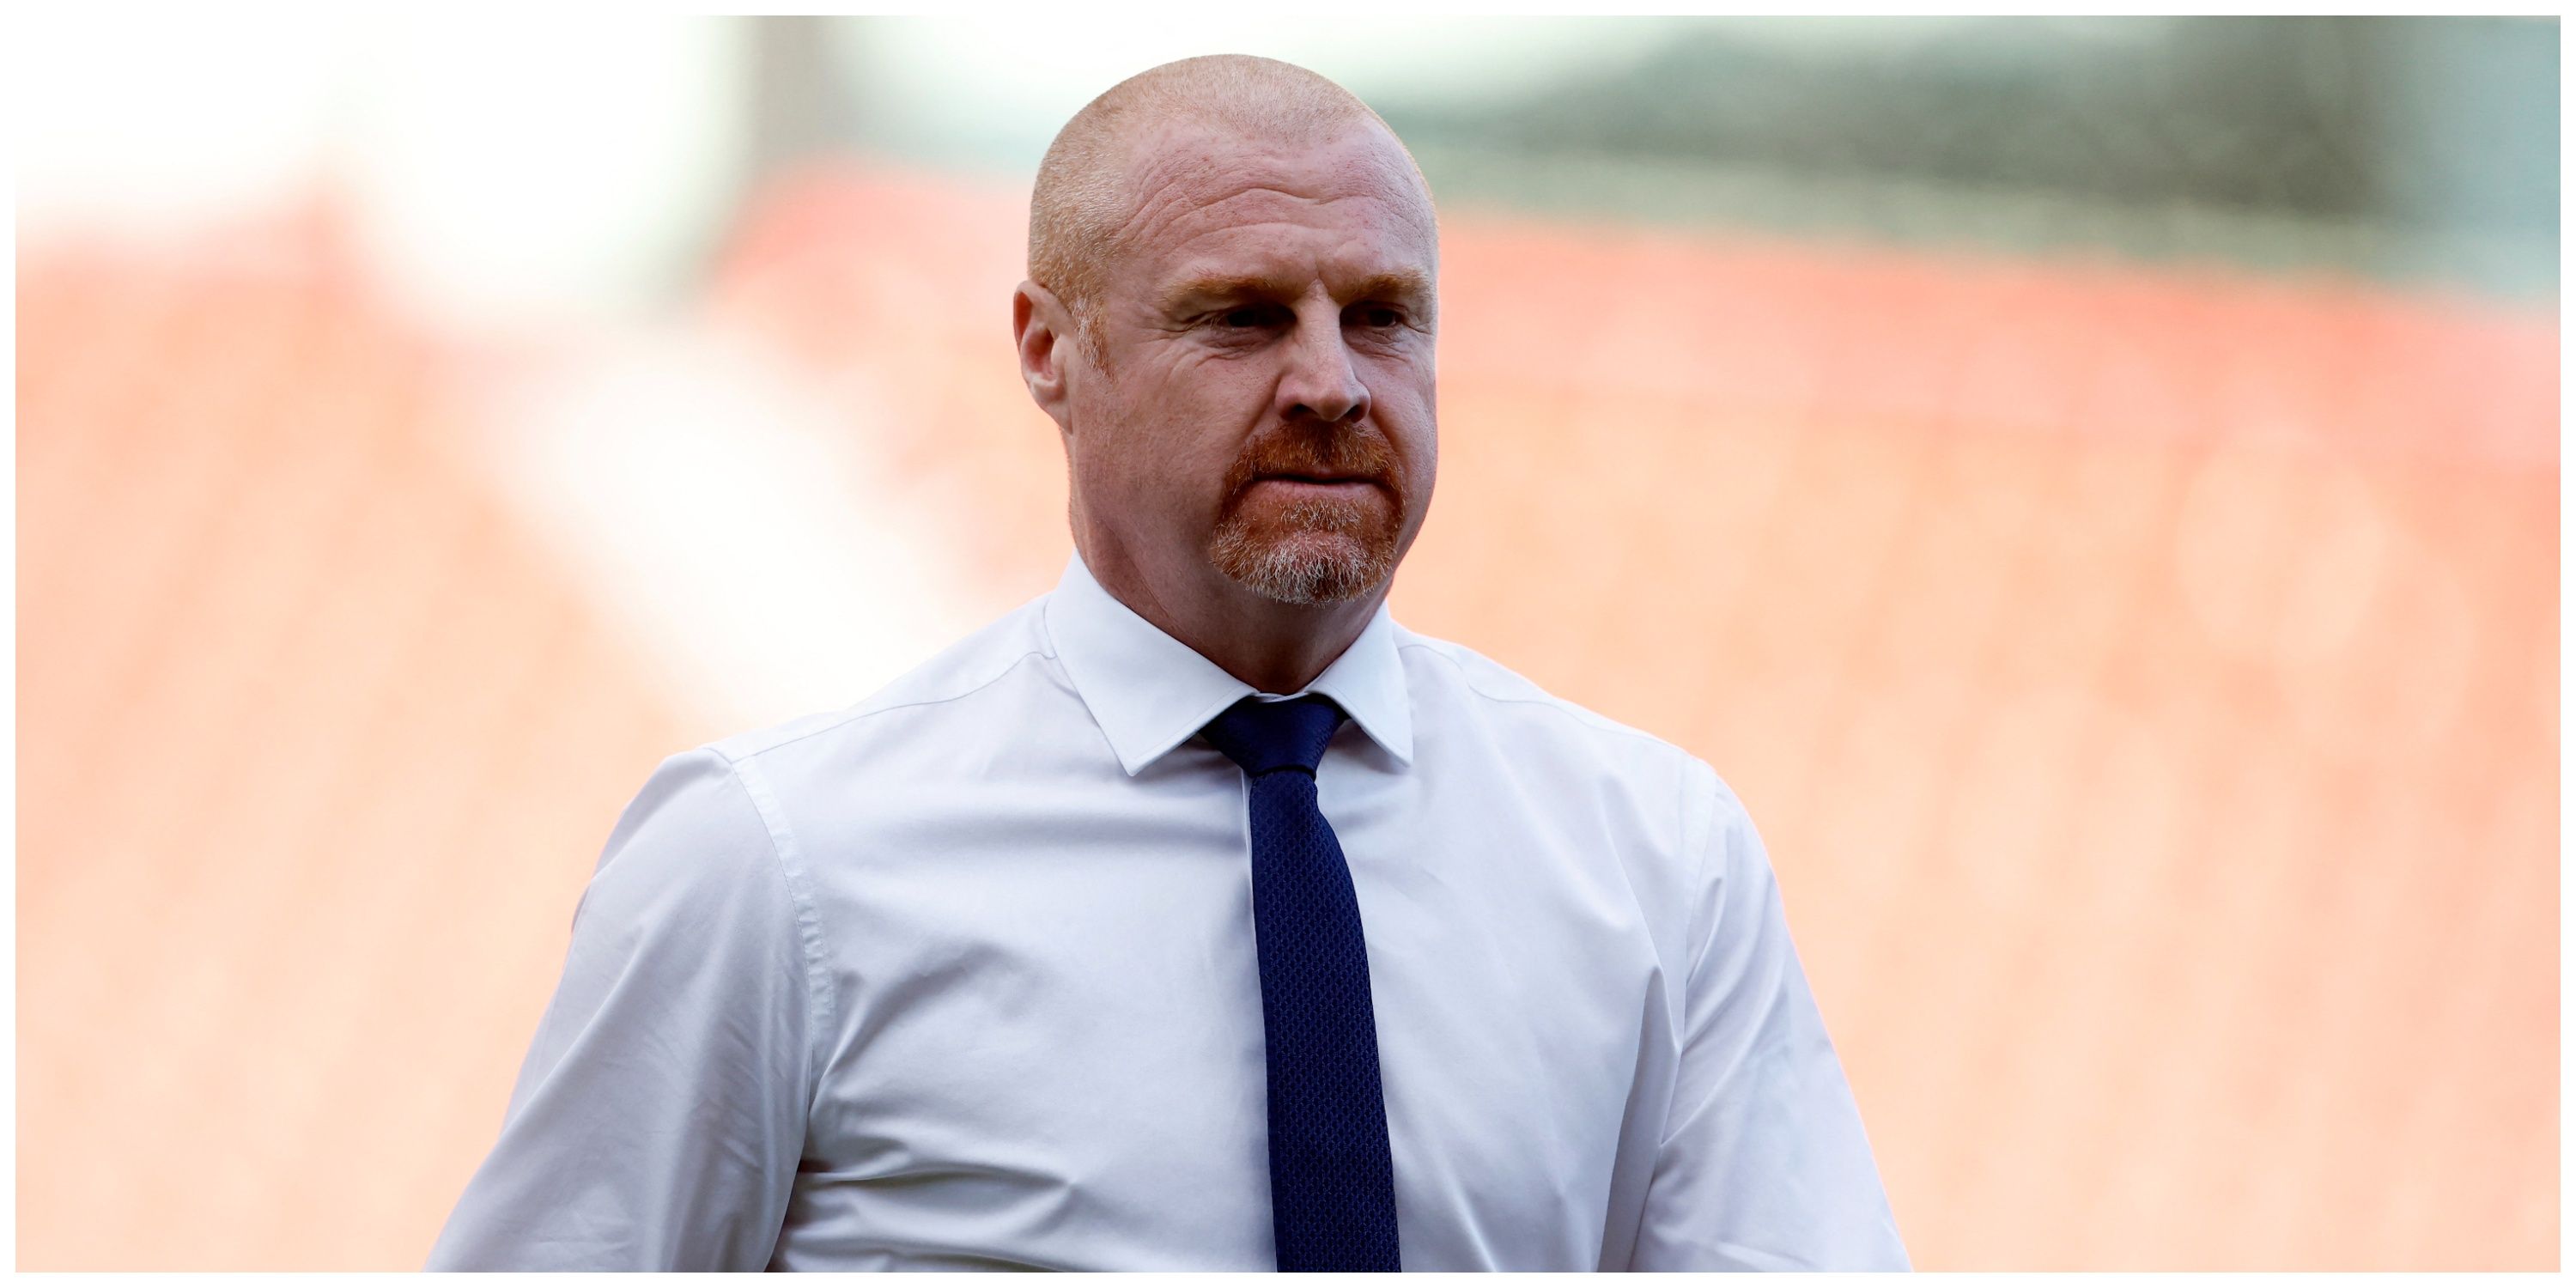 Sean Dyche looks on 3